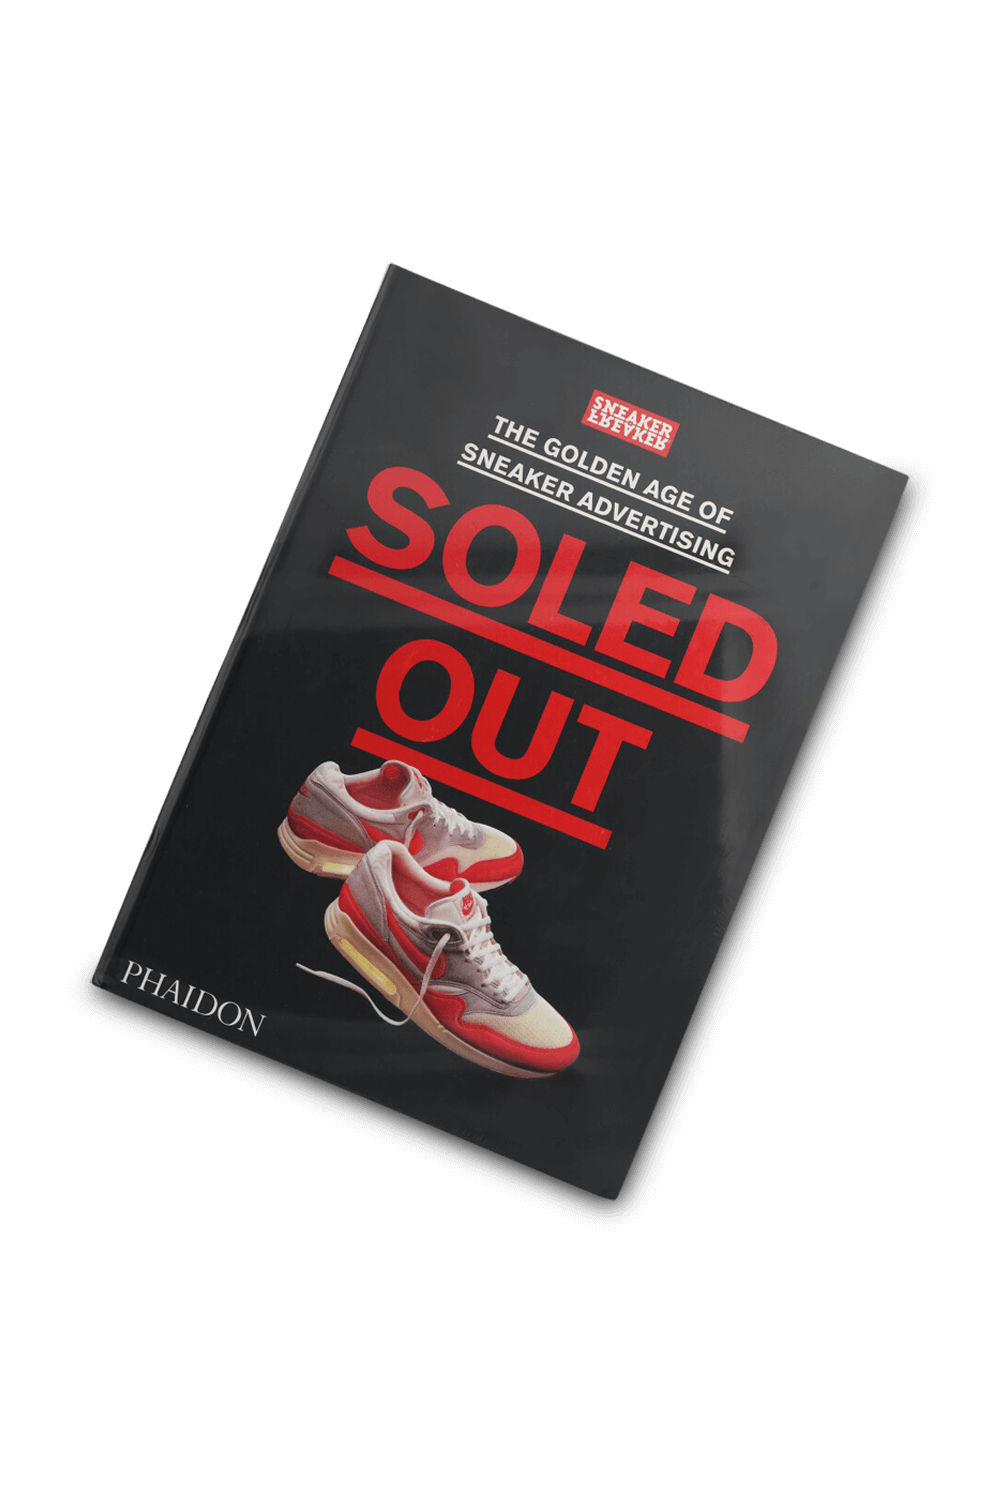 Soled Out: The Golden Age of Sneaker Advertising PHAIDON